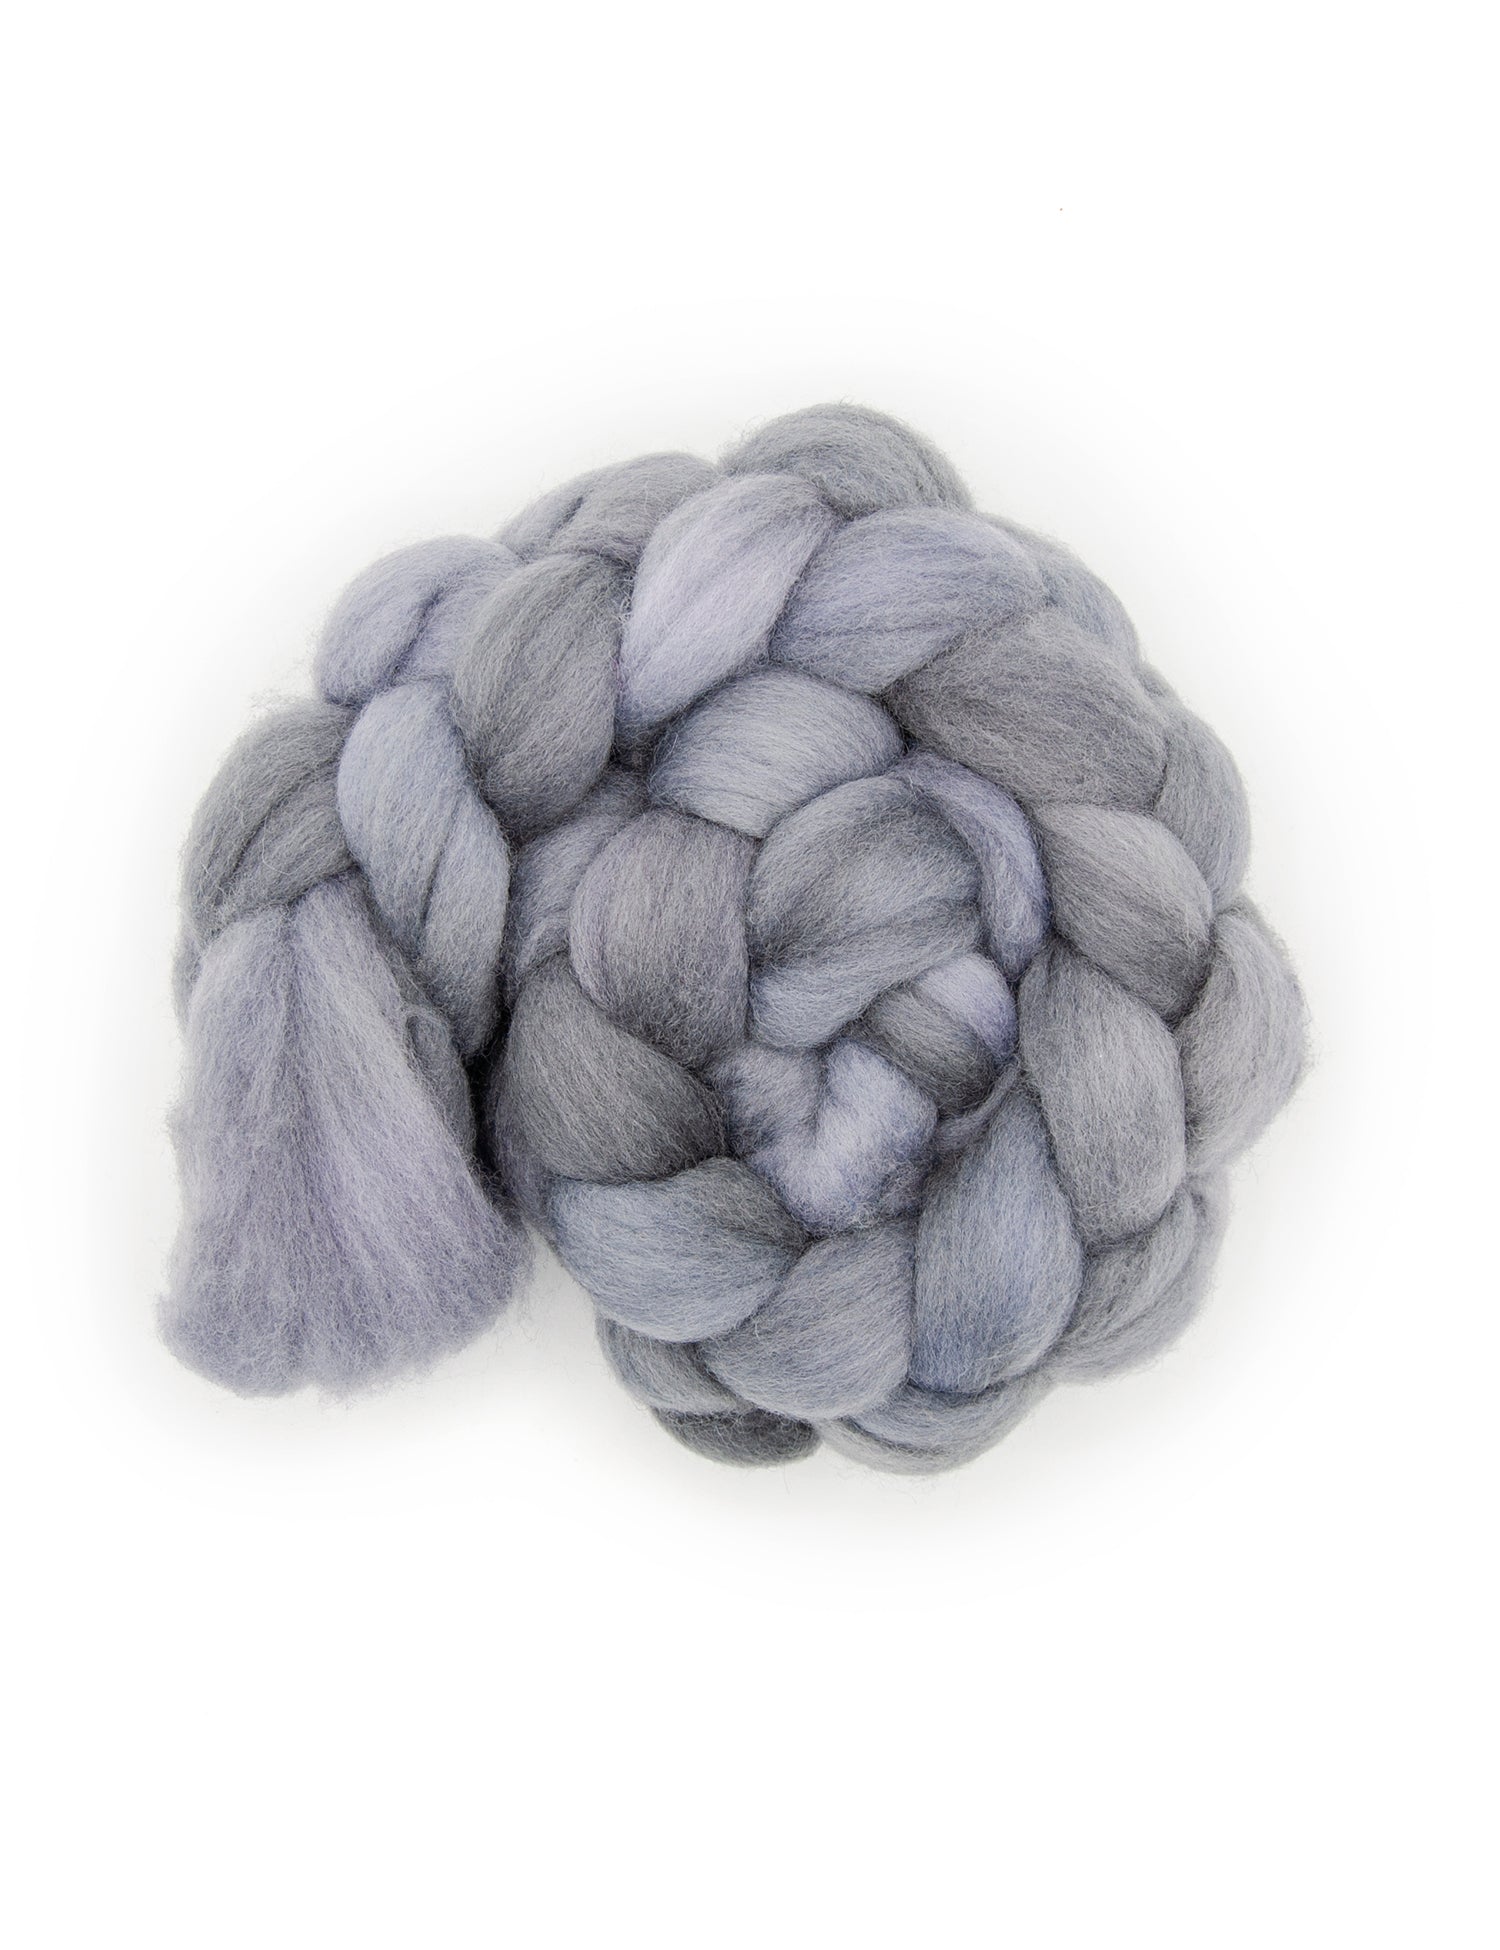 Lauraville Polwarth Roving